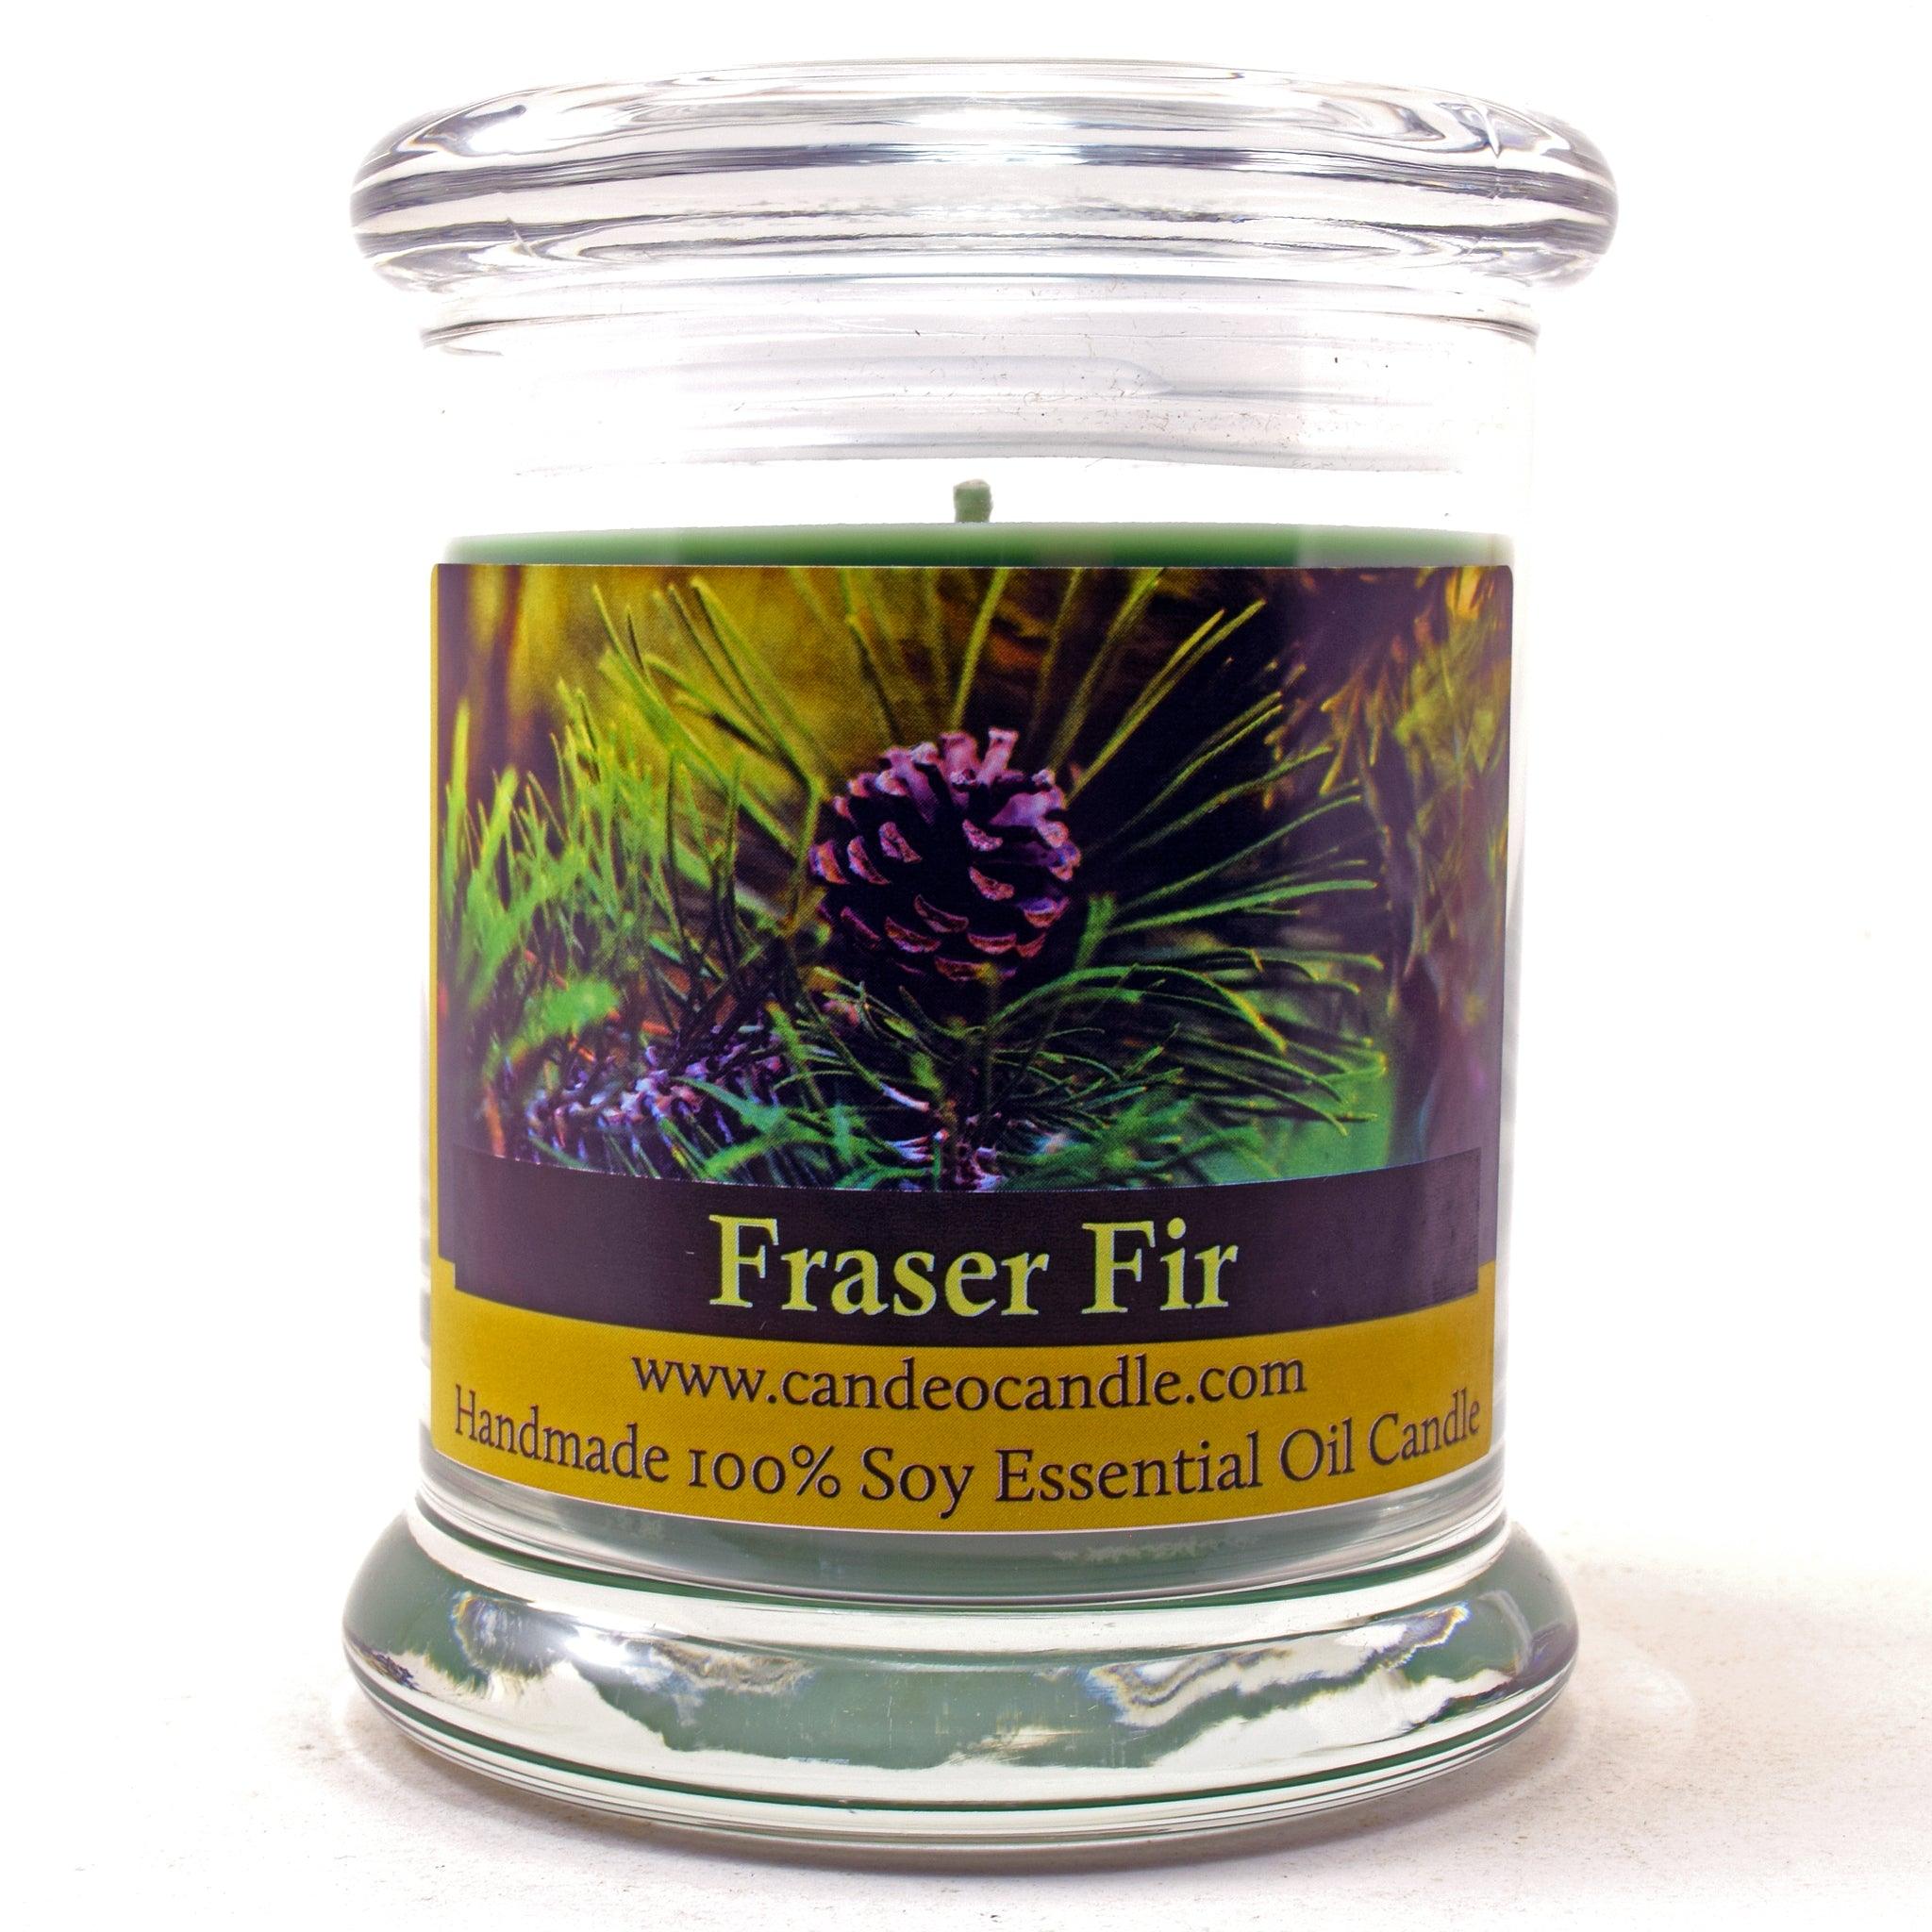 Fraser Fir, 9oz Soy Candle Jar - Candeo Candle